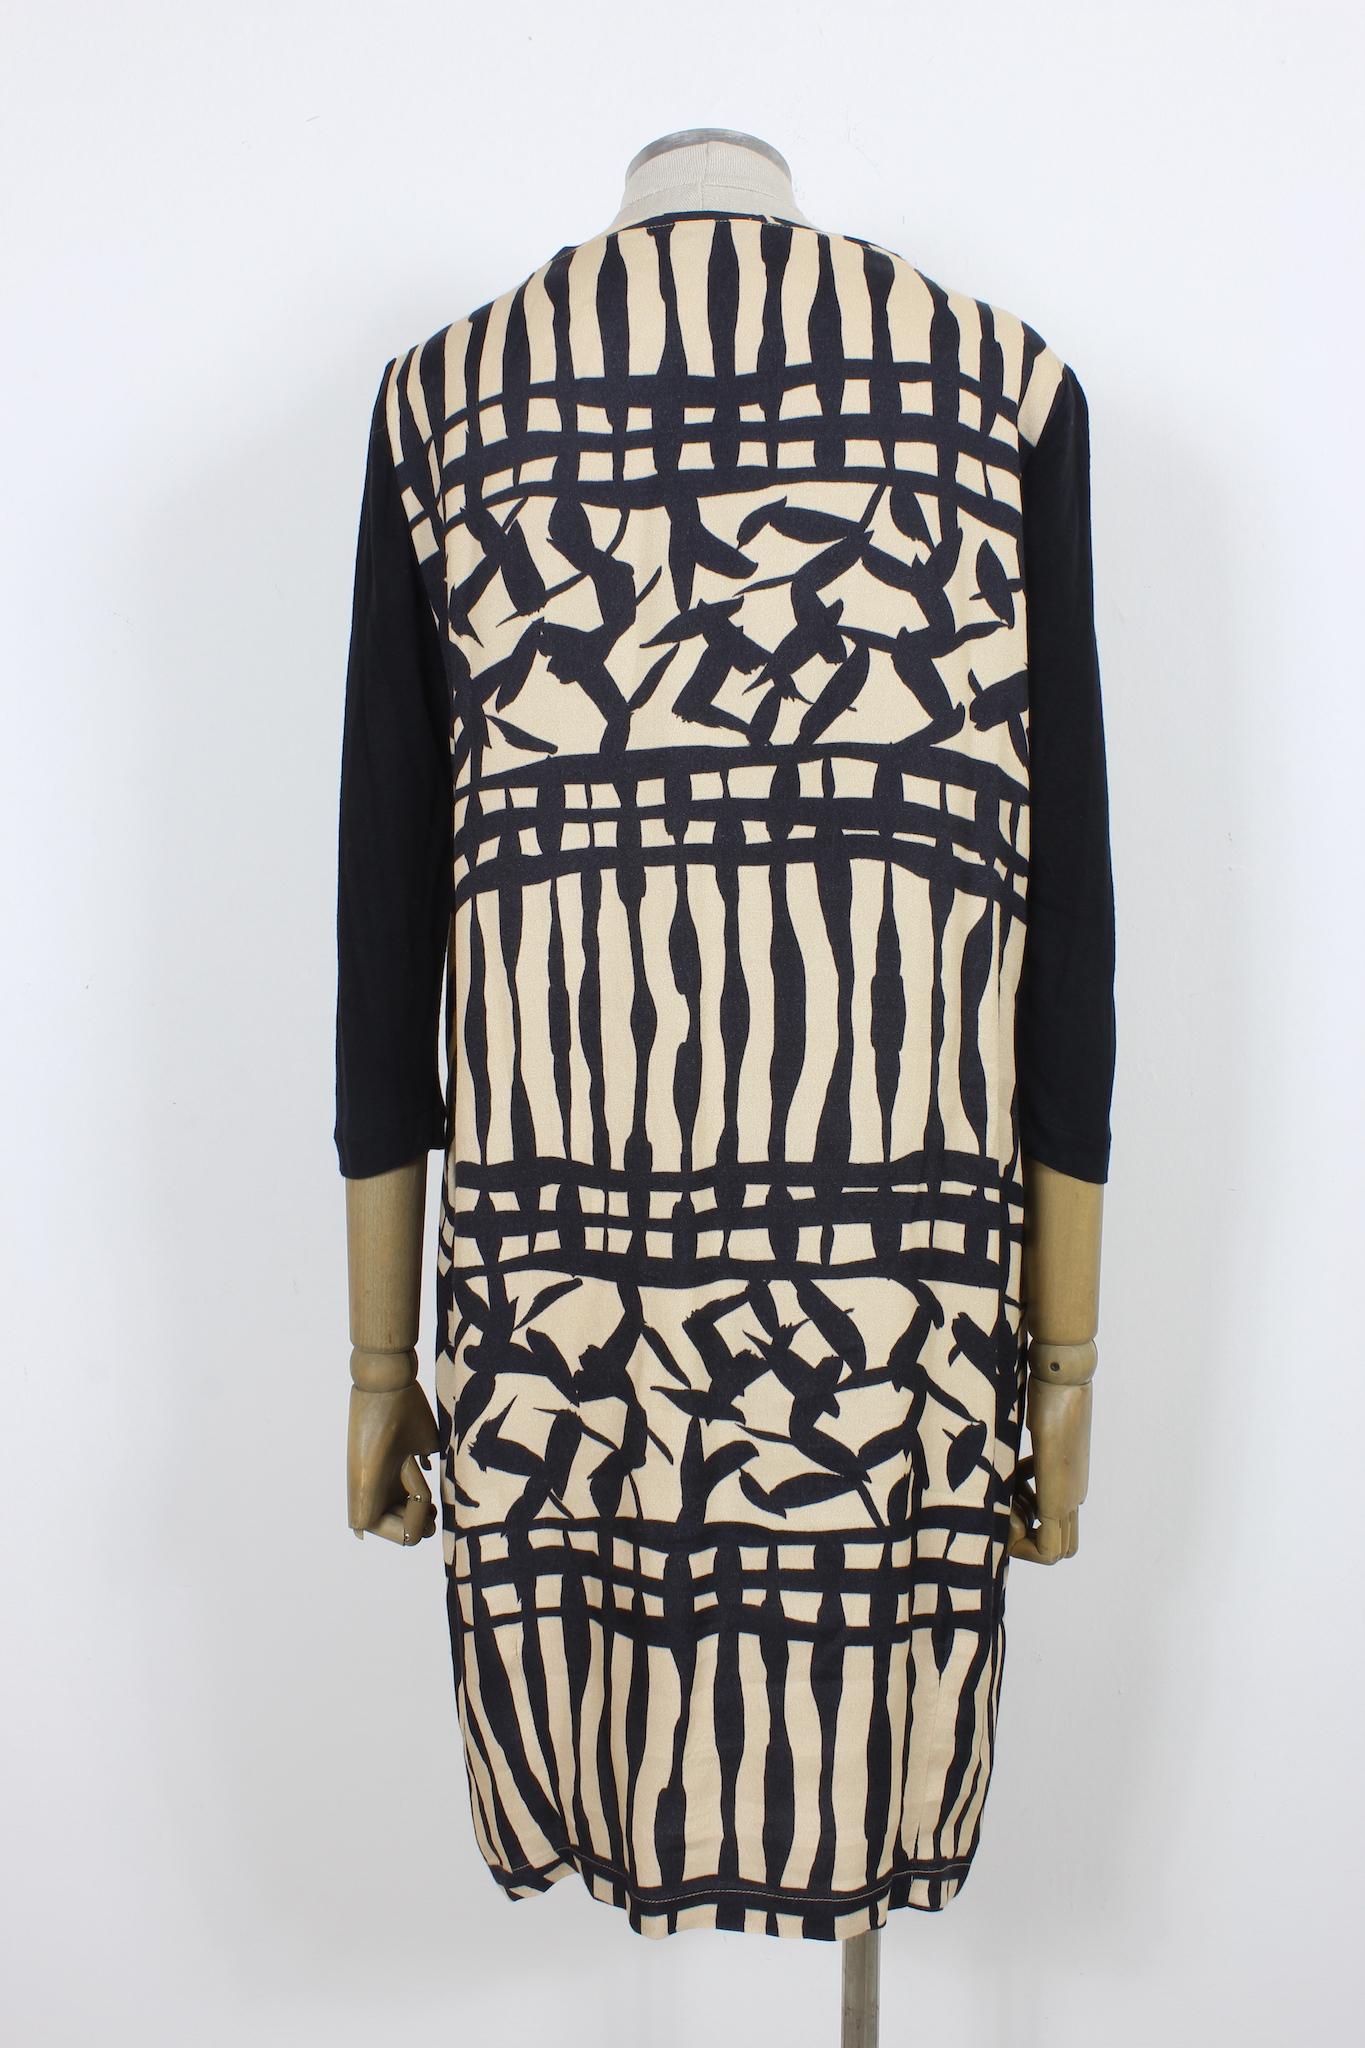 Maliparmi 2000s casual dress. Tunic style dress, knee length, beige and black color with abstract pattern. 3/4 sleeves, 90% viscose, 10% angora fabric. Made in italy.

Size: 46 It 12 Us 14 Uk

Shoulder: 44cm
Bust/Chest: 53 cm
Sleeve: 48 cm
Length: